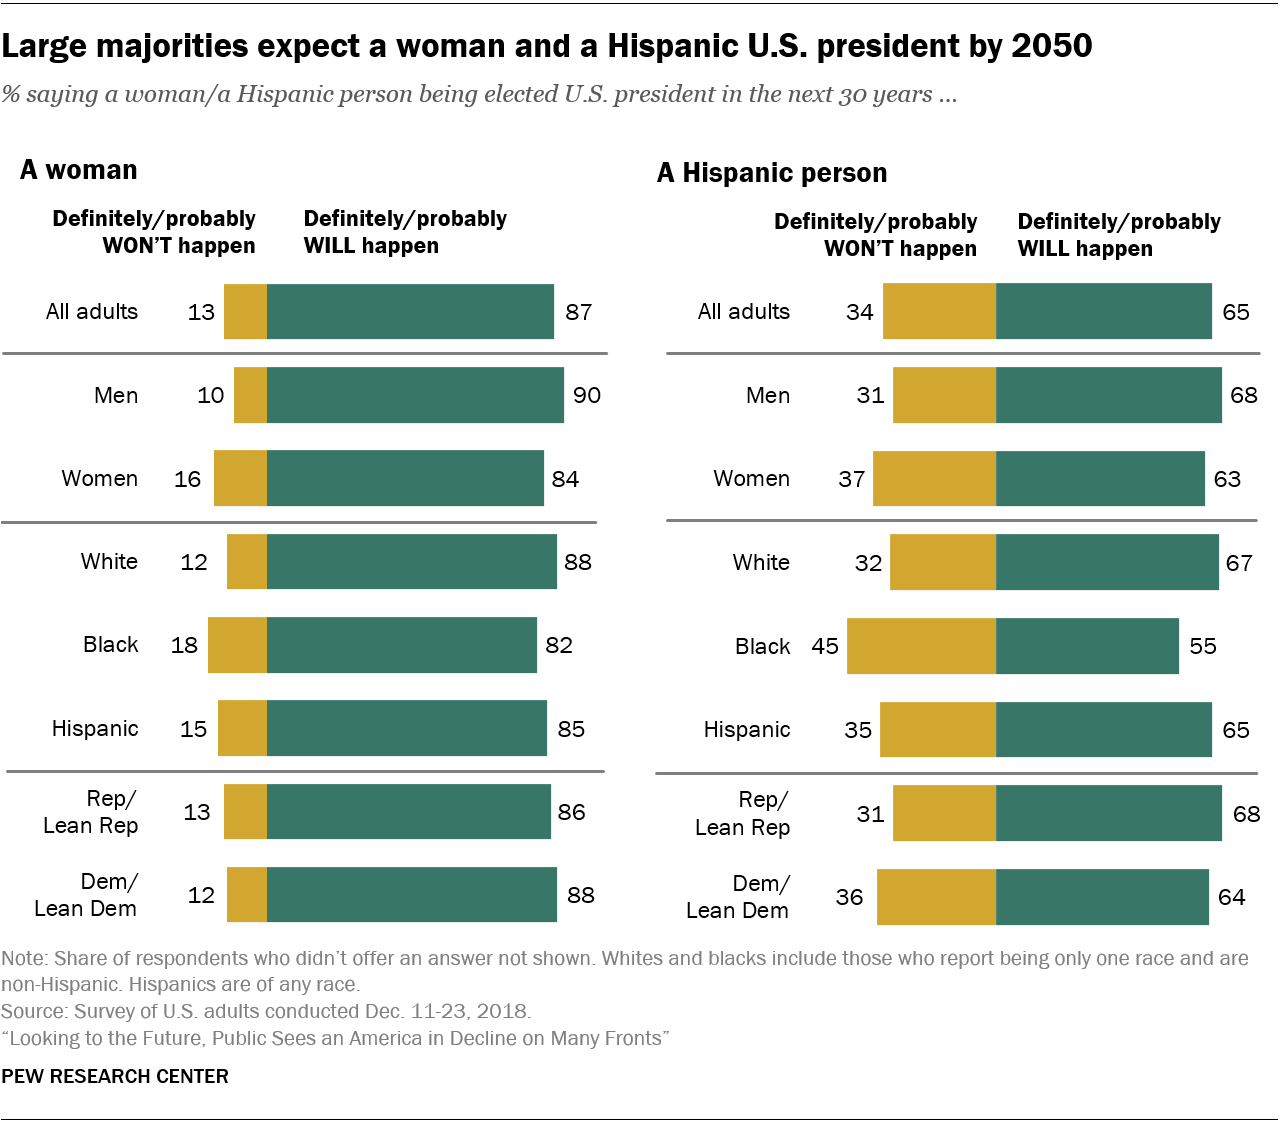 Large majorities expect a woman and a Hispanic U.S. president by 2050